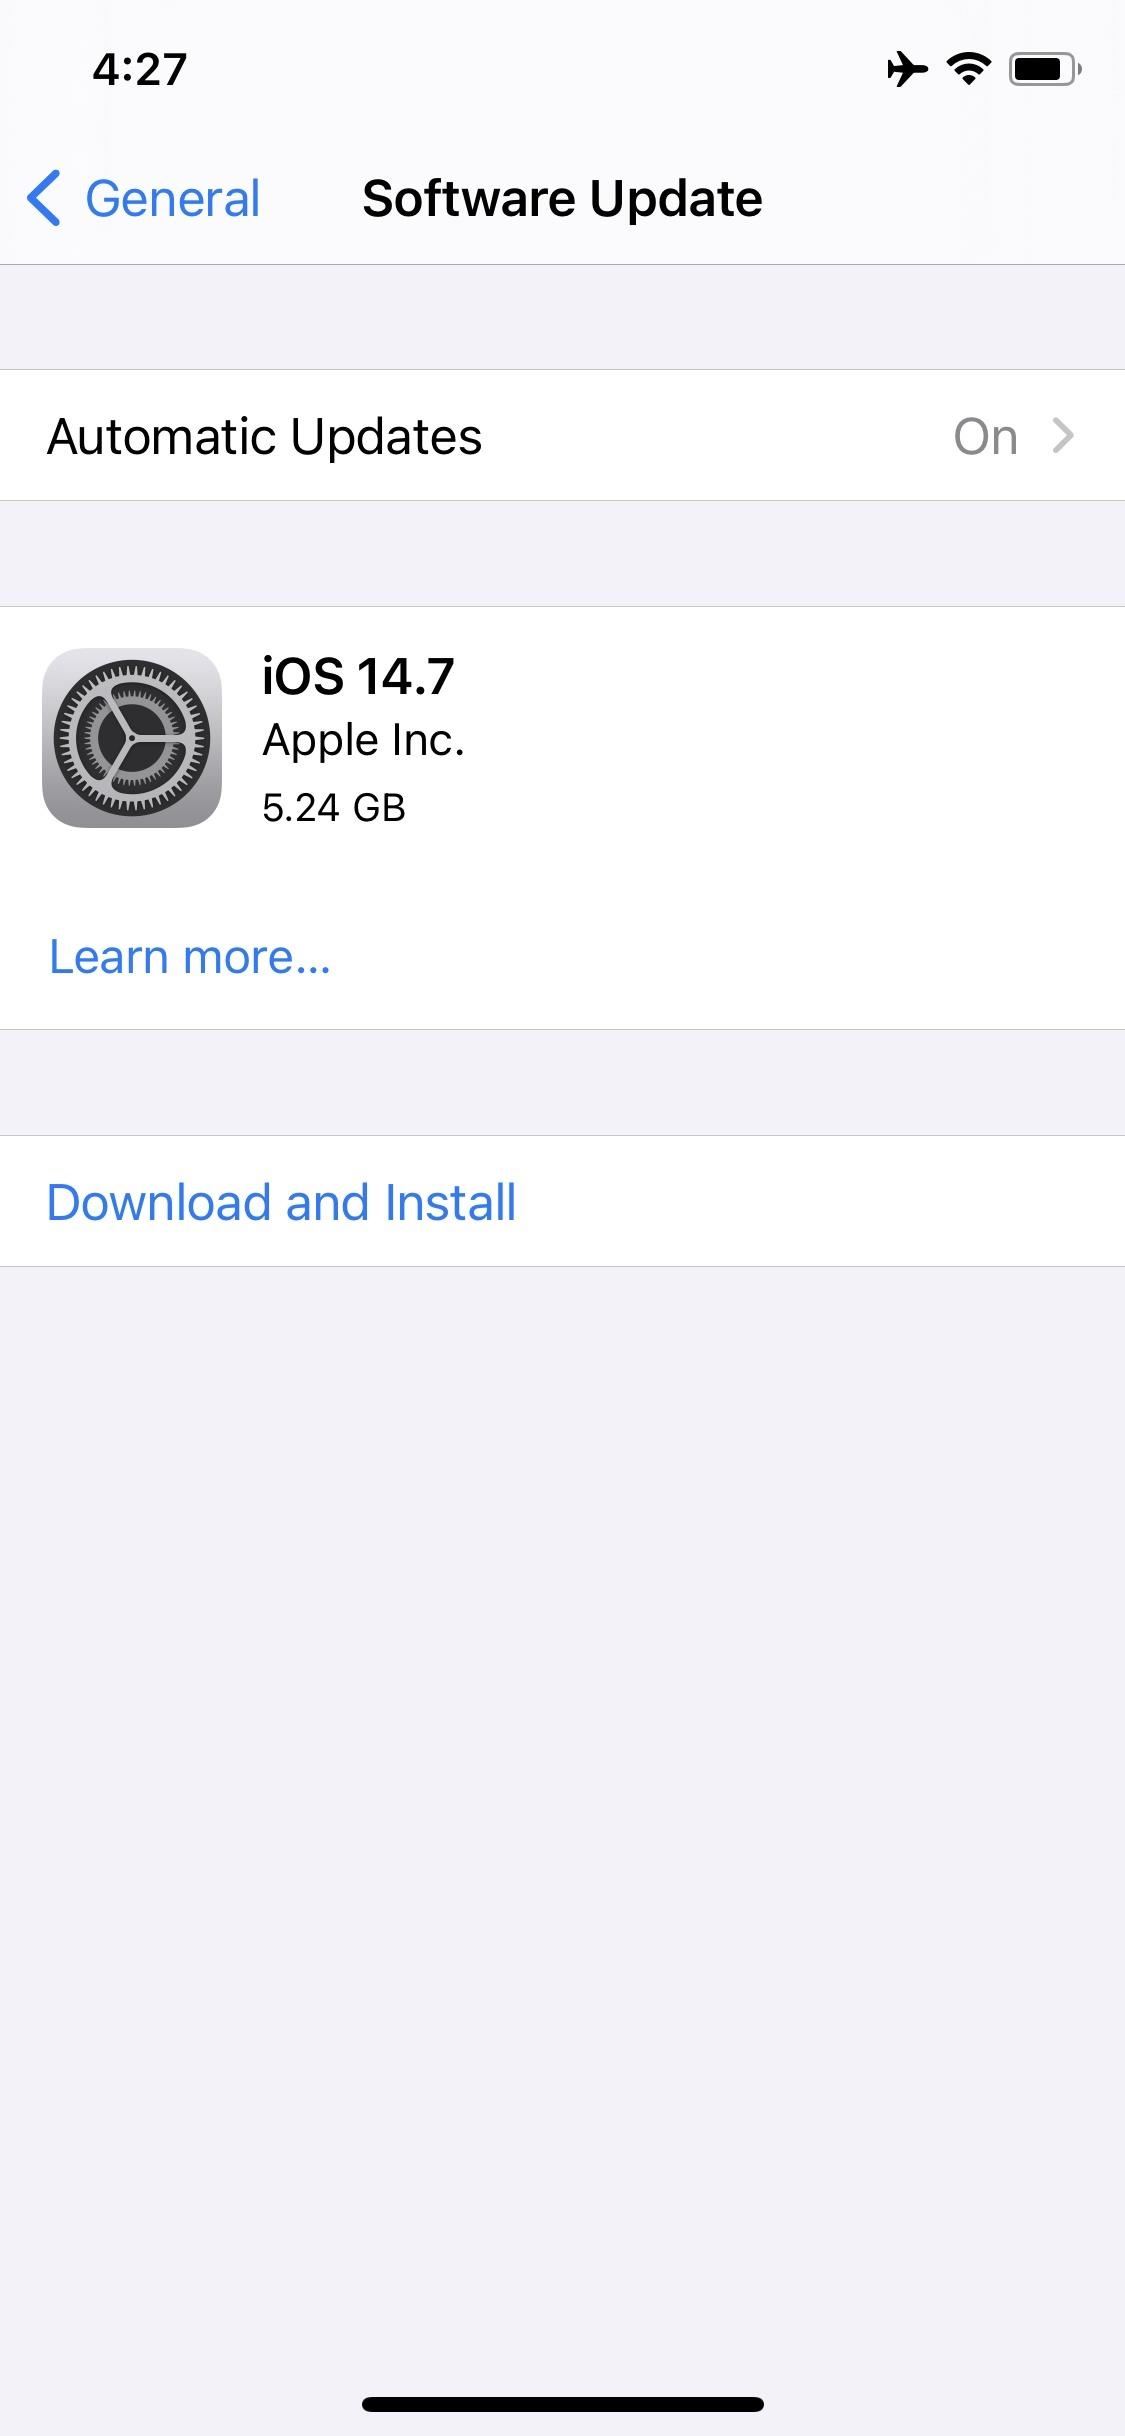 Apple Releases iOS 14.7 Beta 1 for iOS Developers & Public Testers